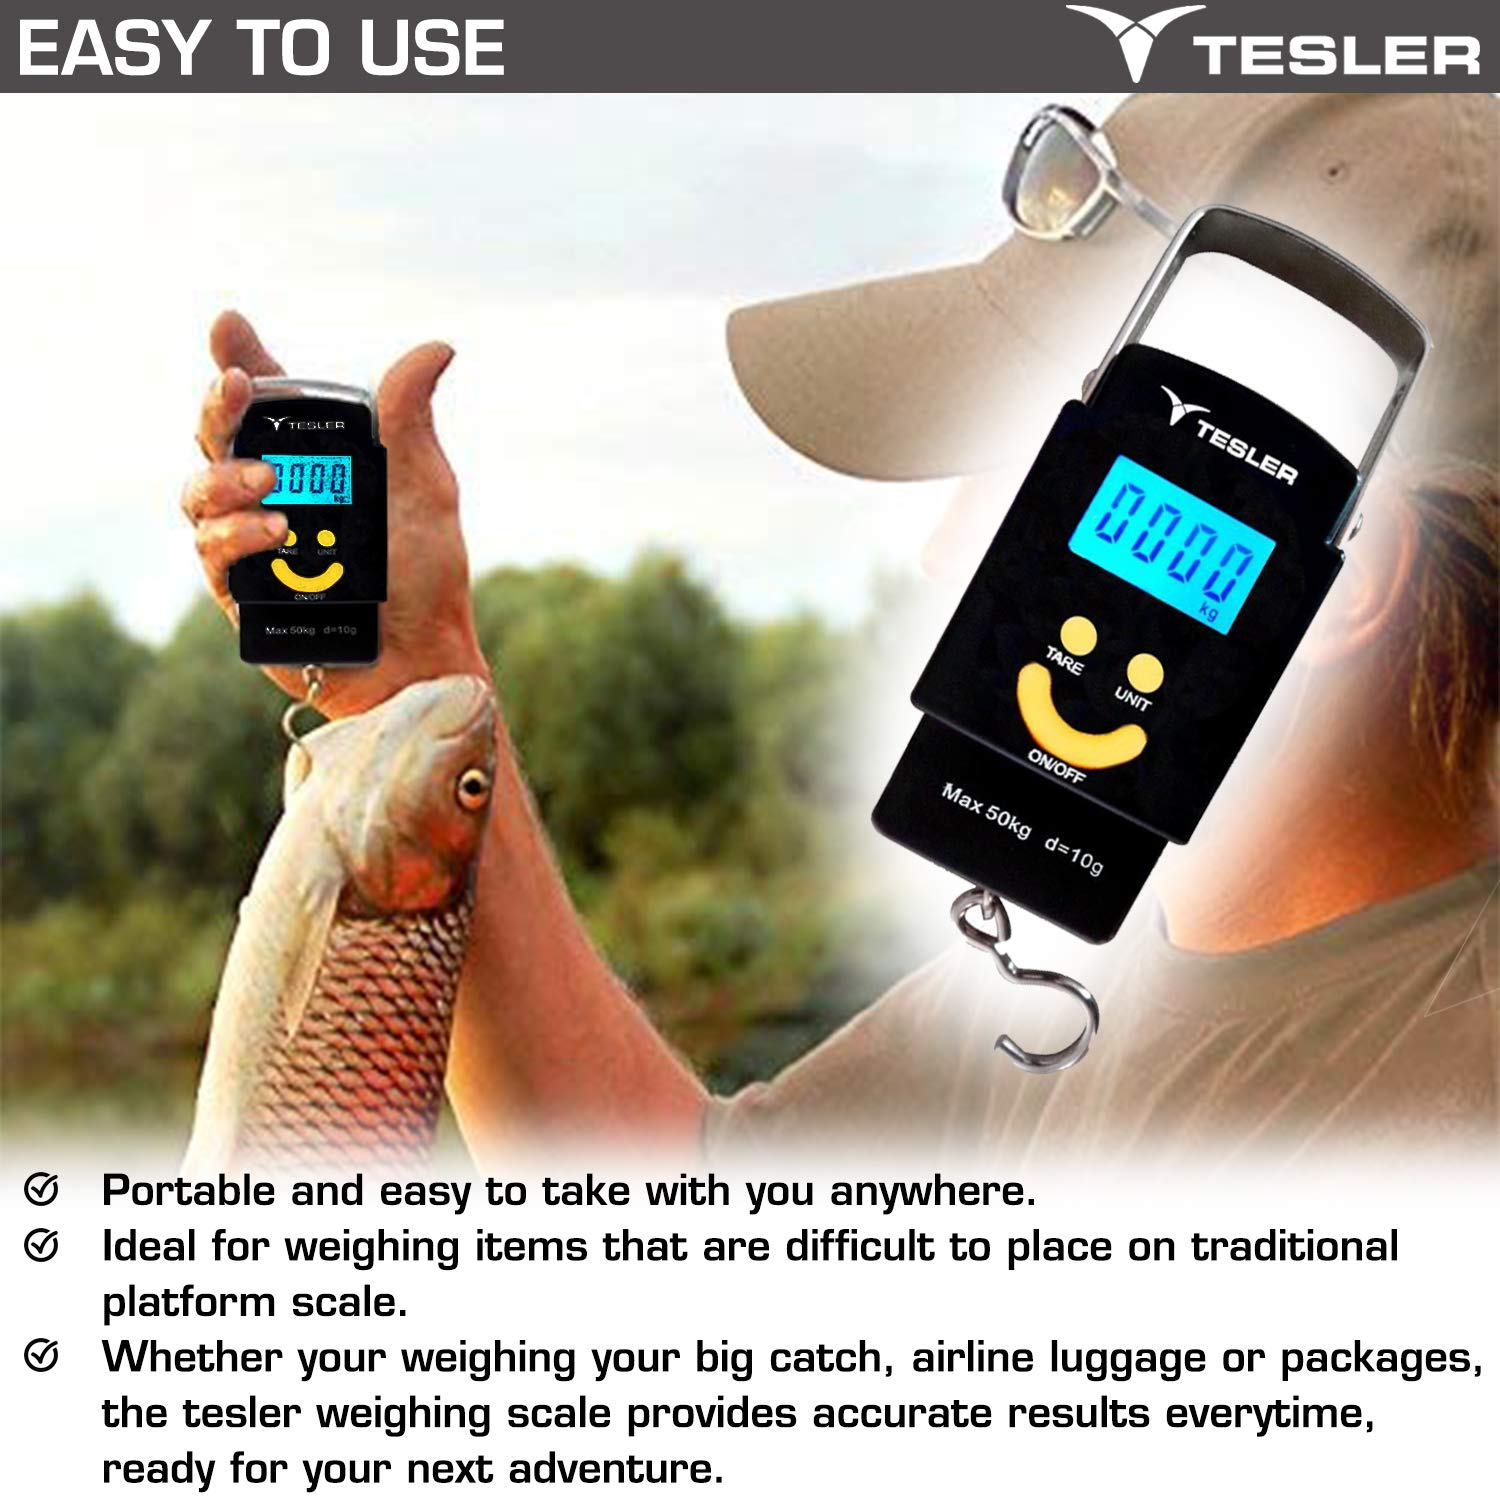 Tesler Portable Electronic Weight Machine, Weight Measure, Digital LED Screen, Luggage Weighing Scale, (Black)